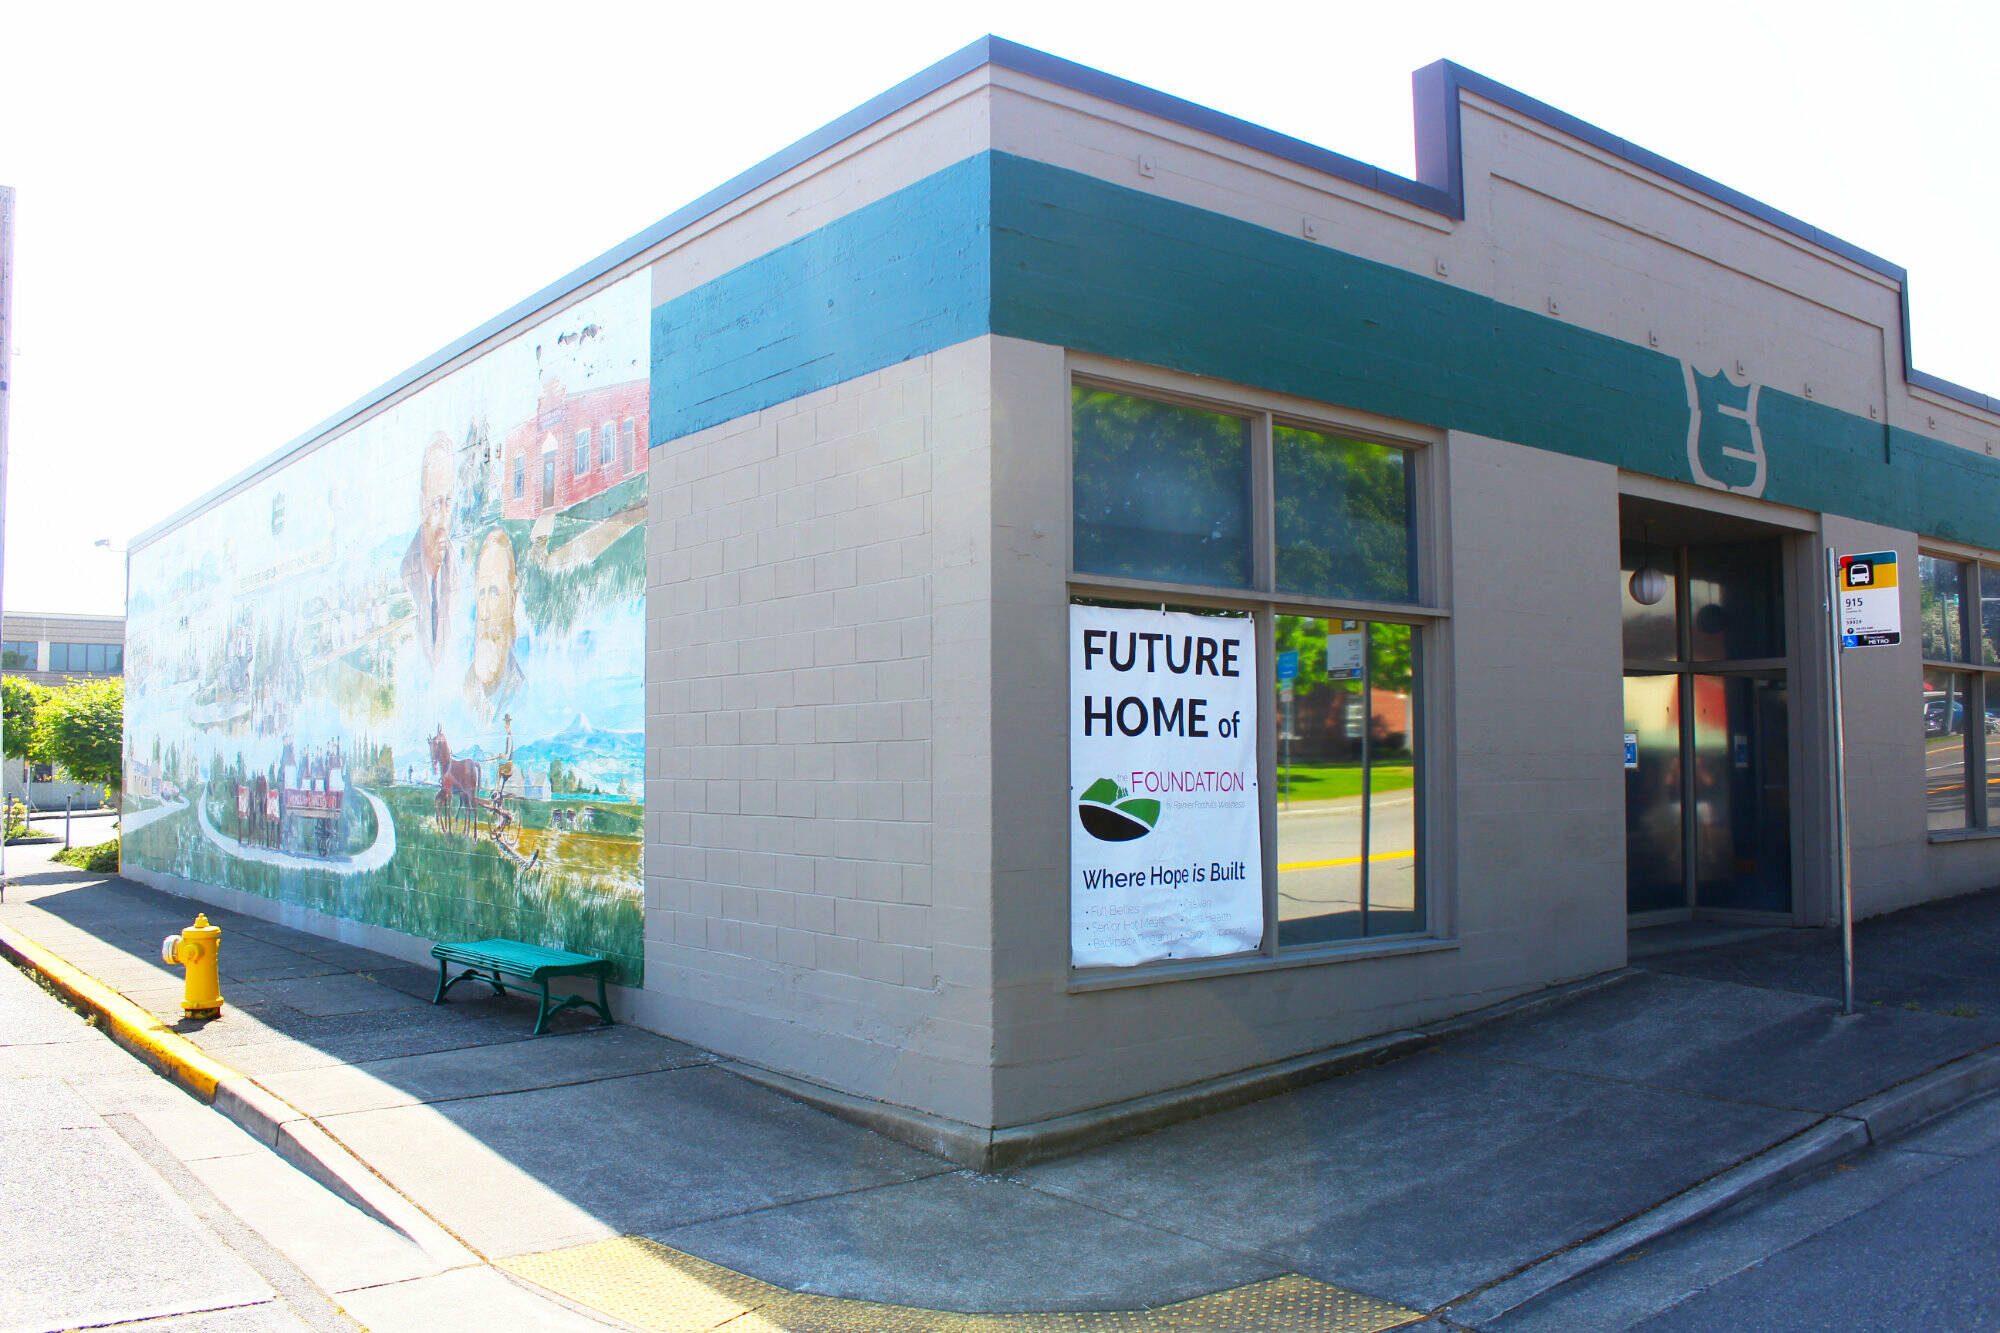 1313 Griffin Avenue will be the new home of the Rainier Foothills Wellness Foundation. However, the mural on the side is unable to be saved during renovations, so a photo will be displayed in the building instead. Photo by Ray Miller-Still